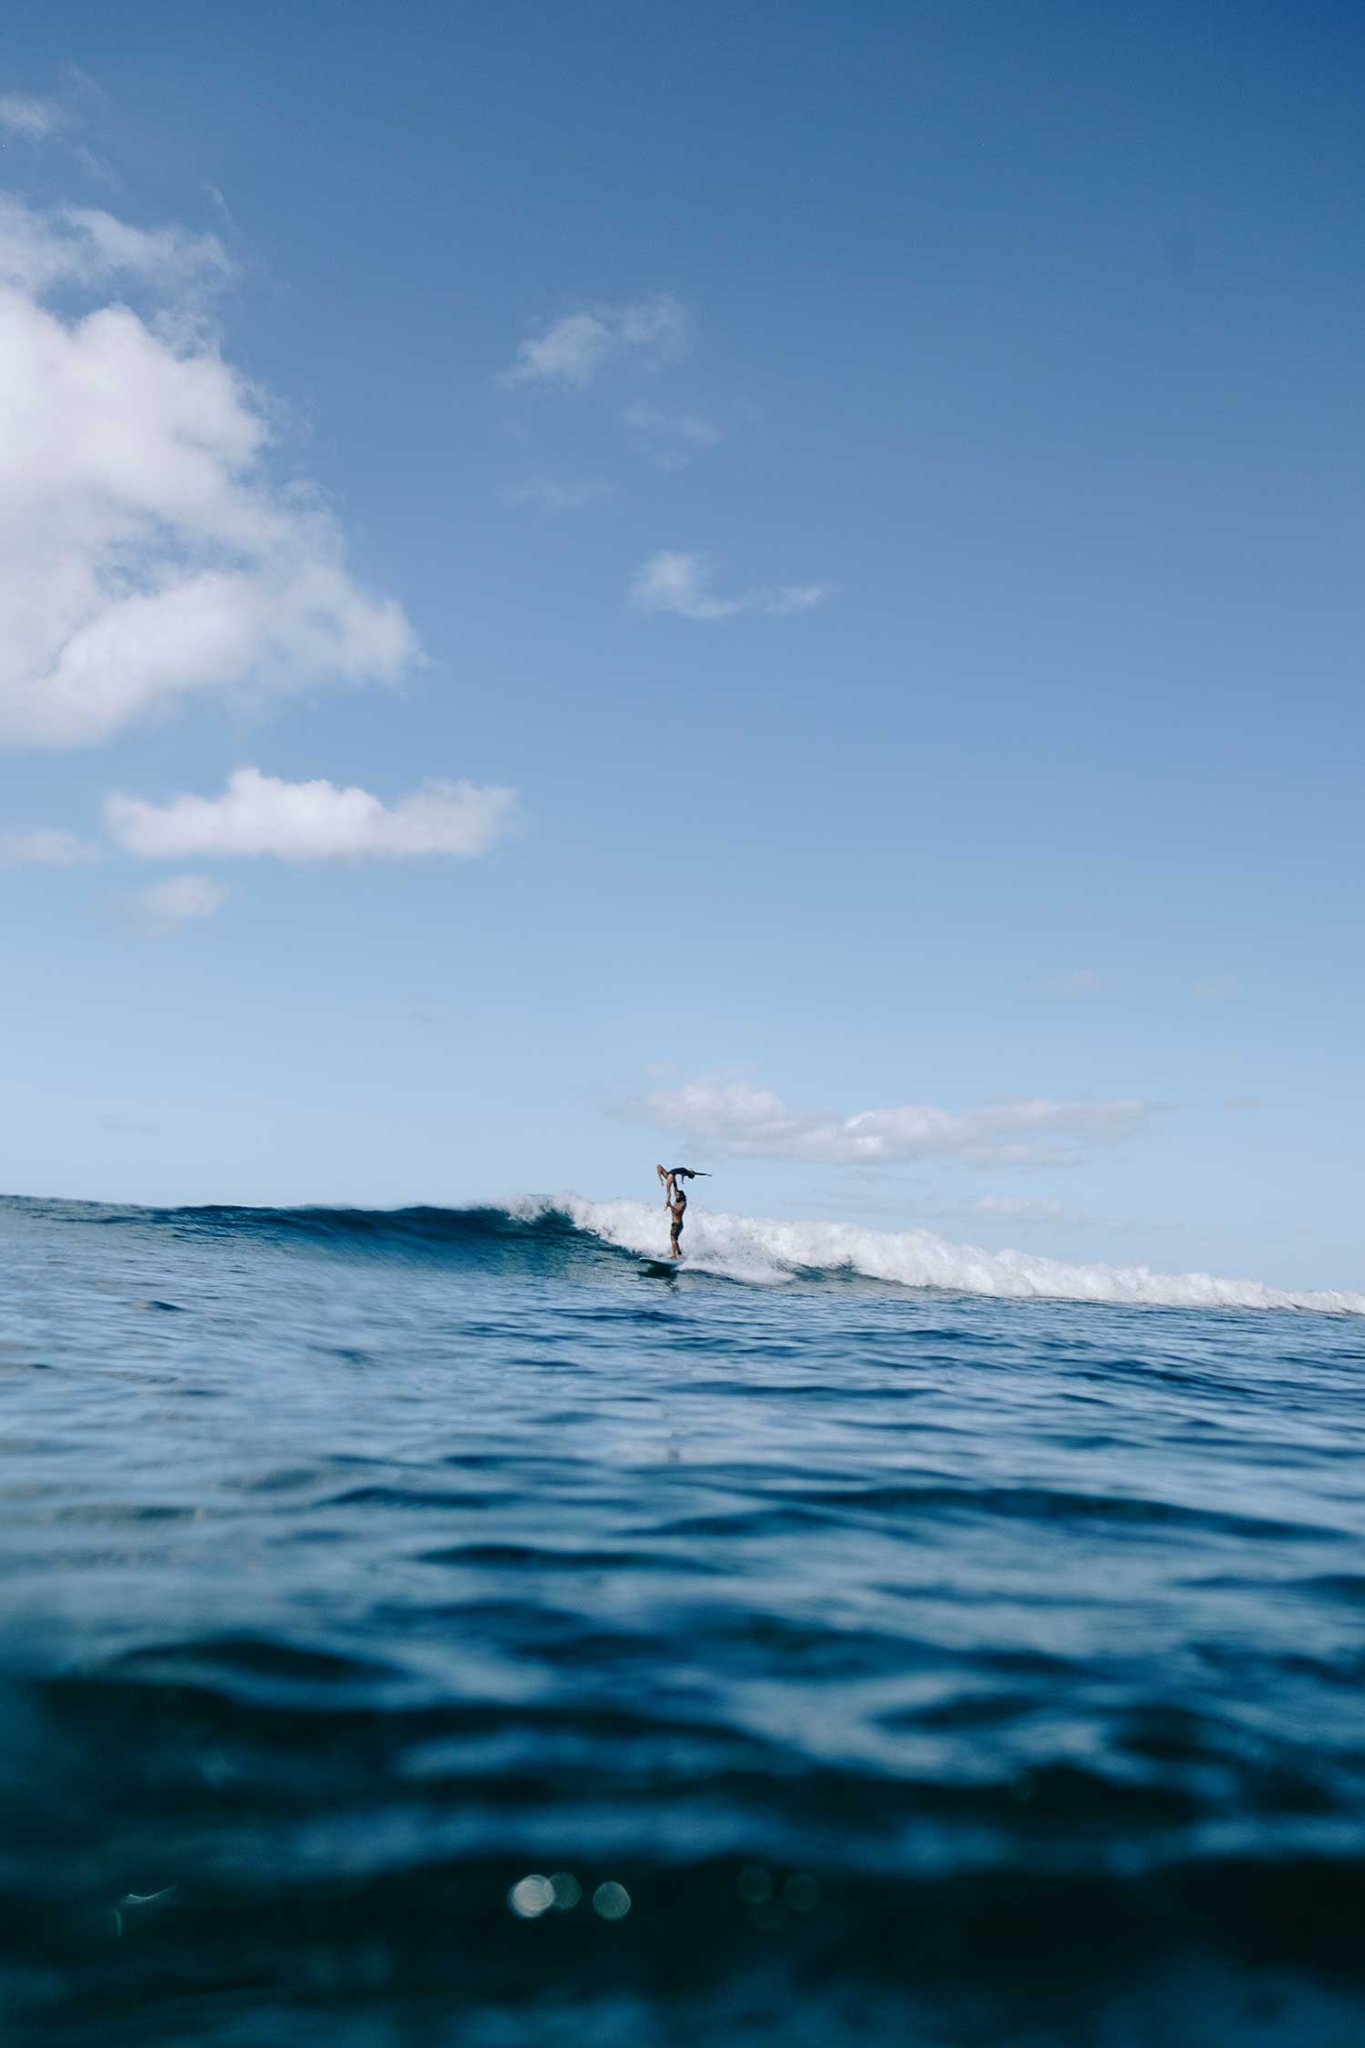 Where to Go Tandem Surfing in Hawaii